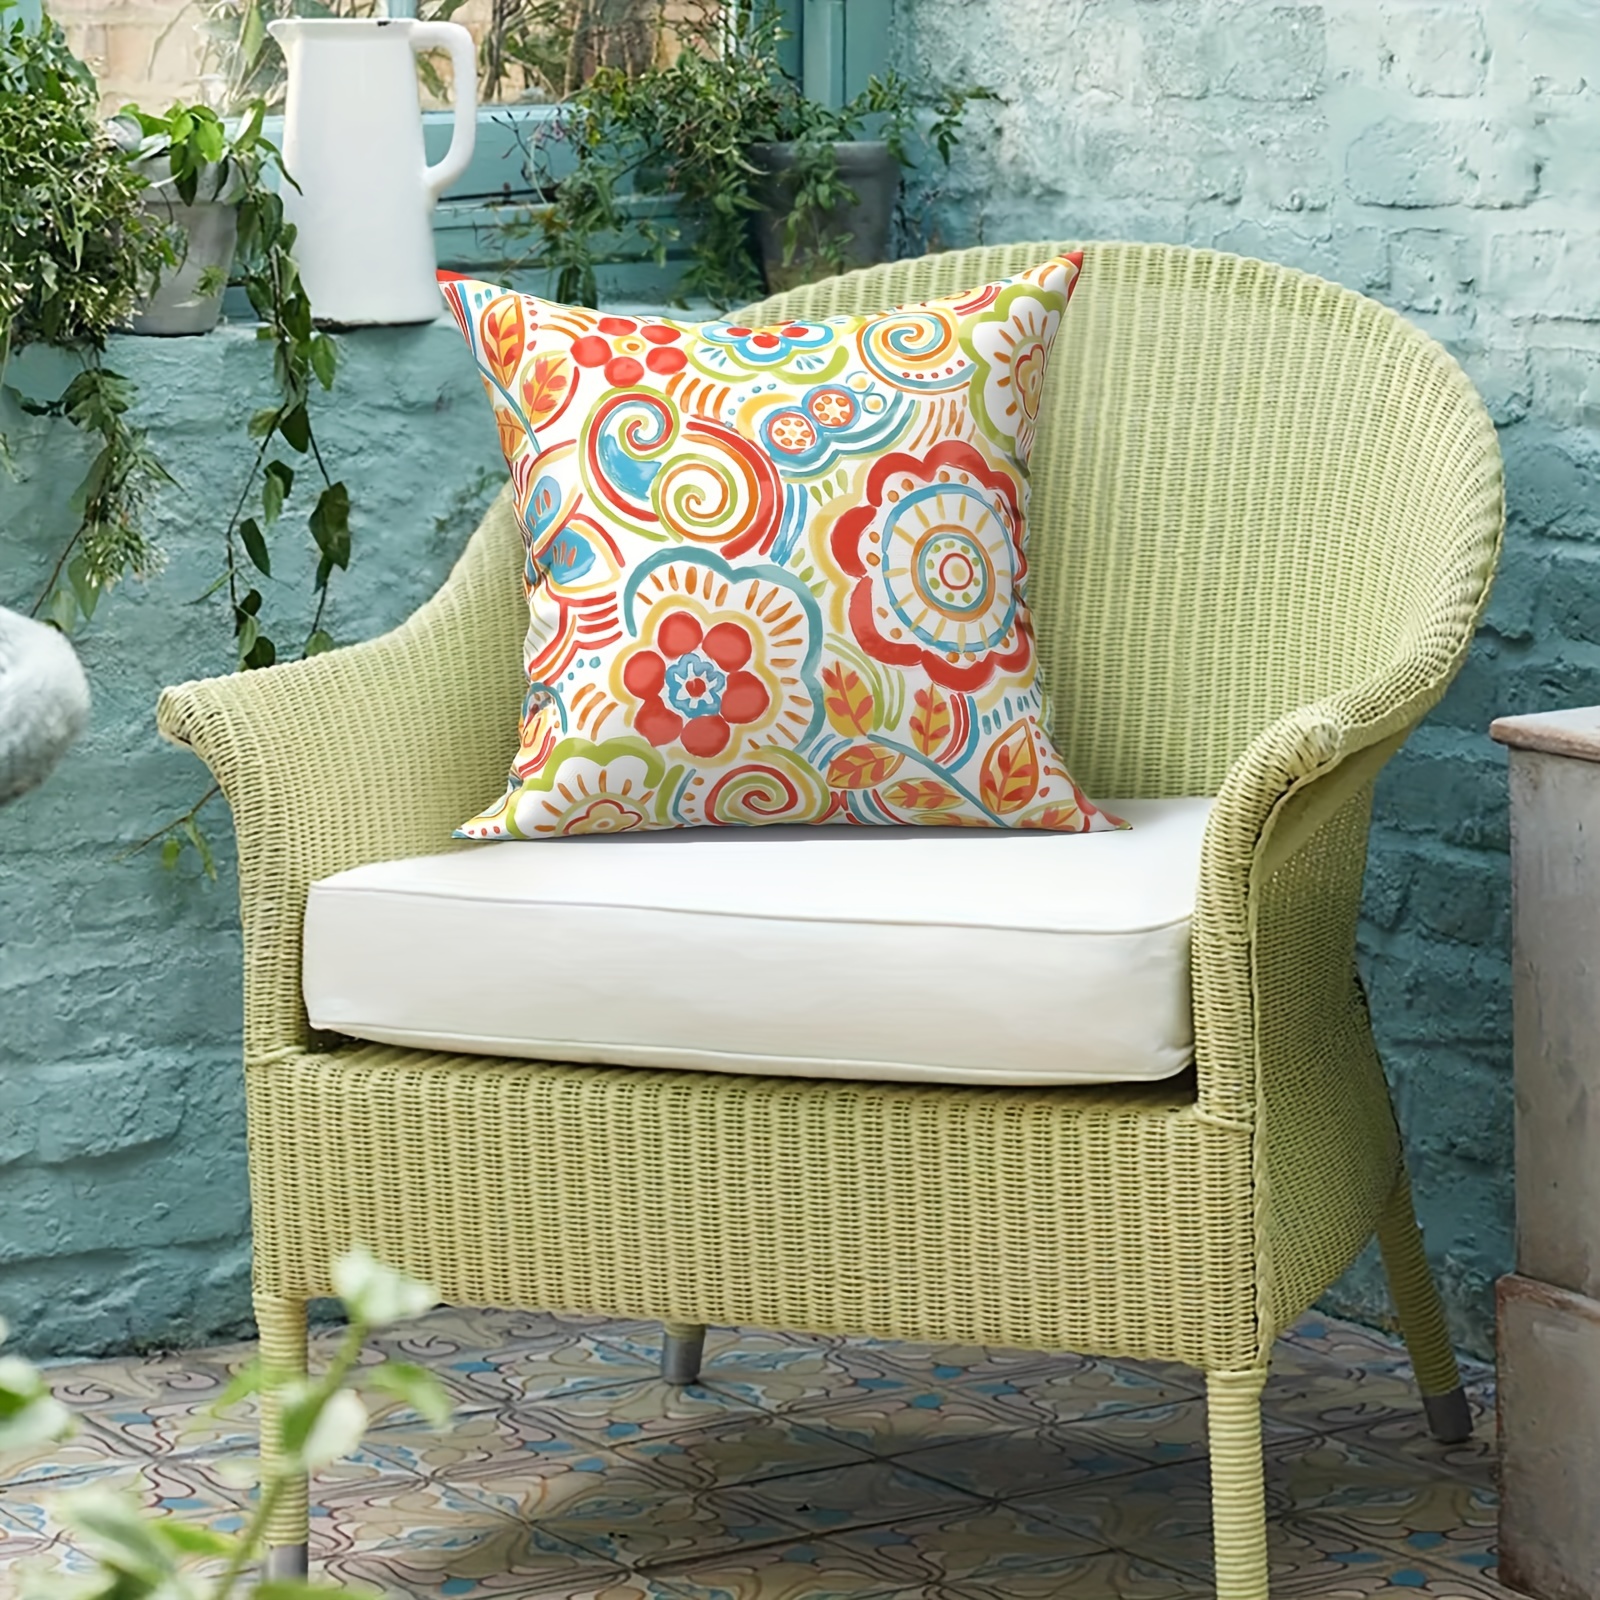 Throw Pillows & Covers, Decorative Outdoor & Chair